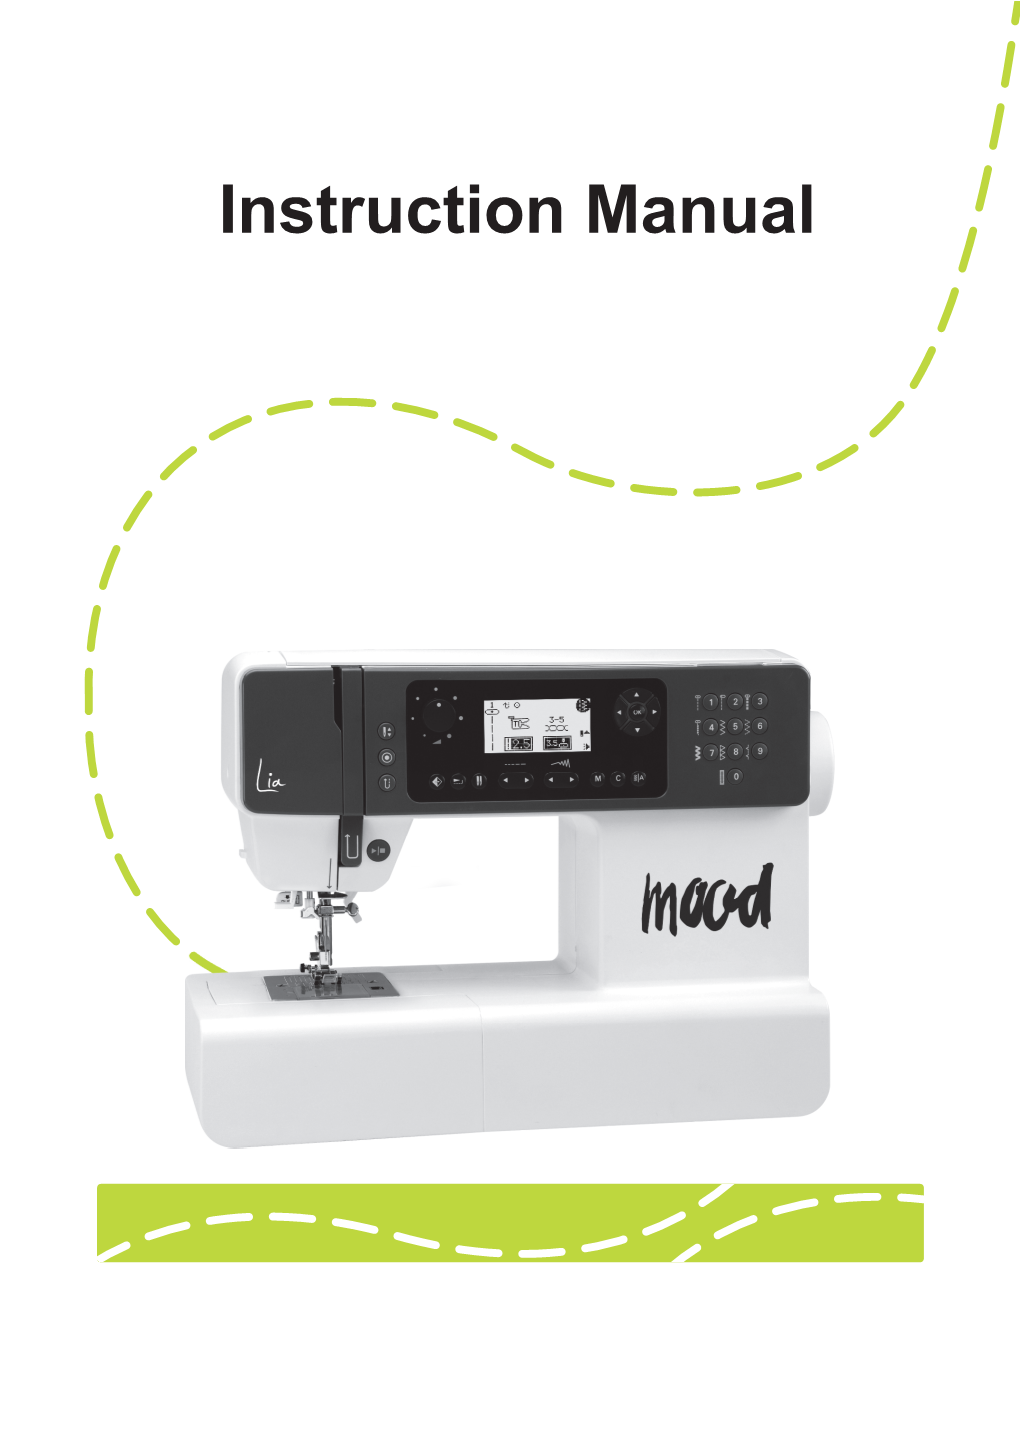 View and Download Instruction Manual for Mood